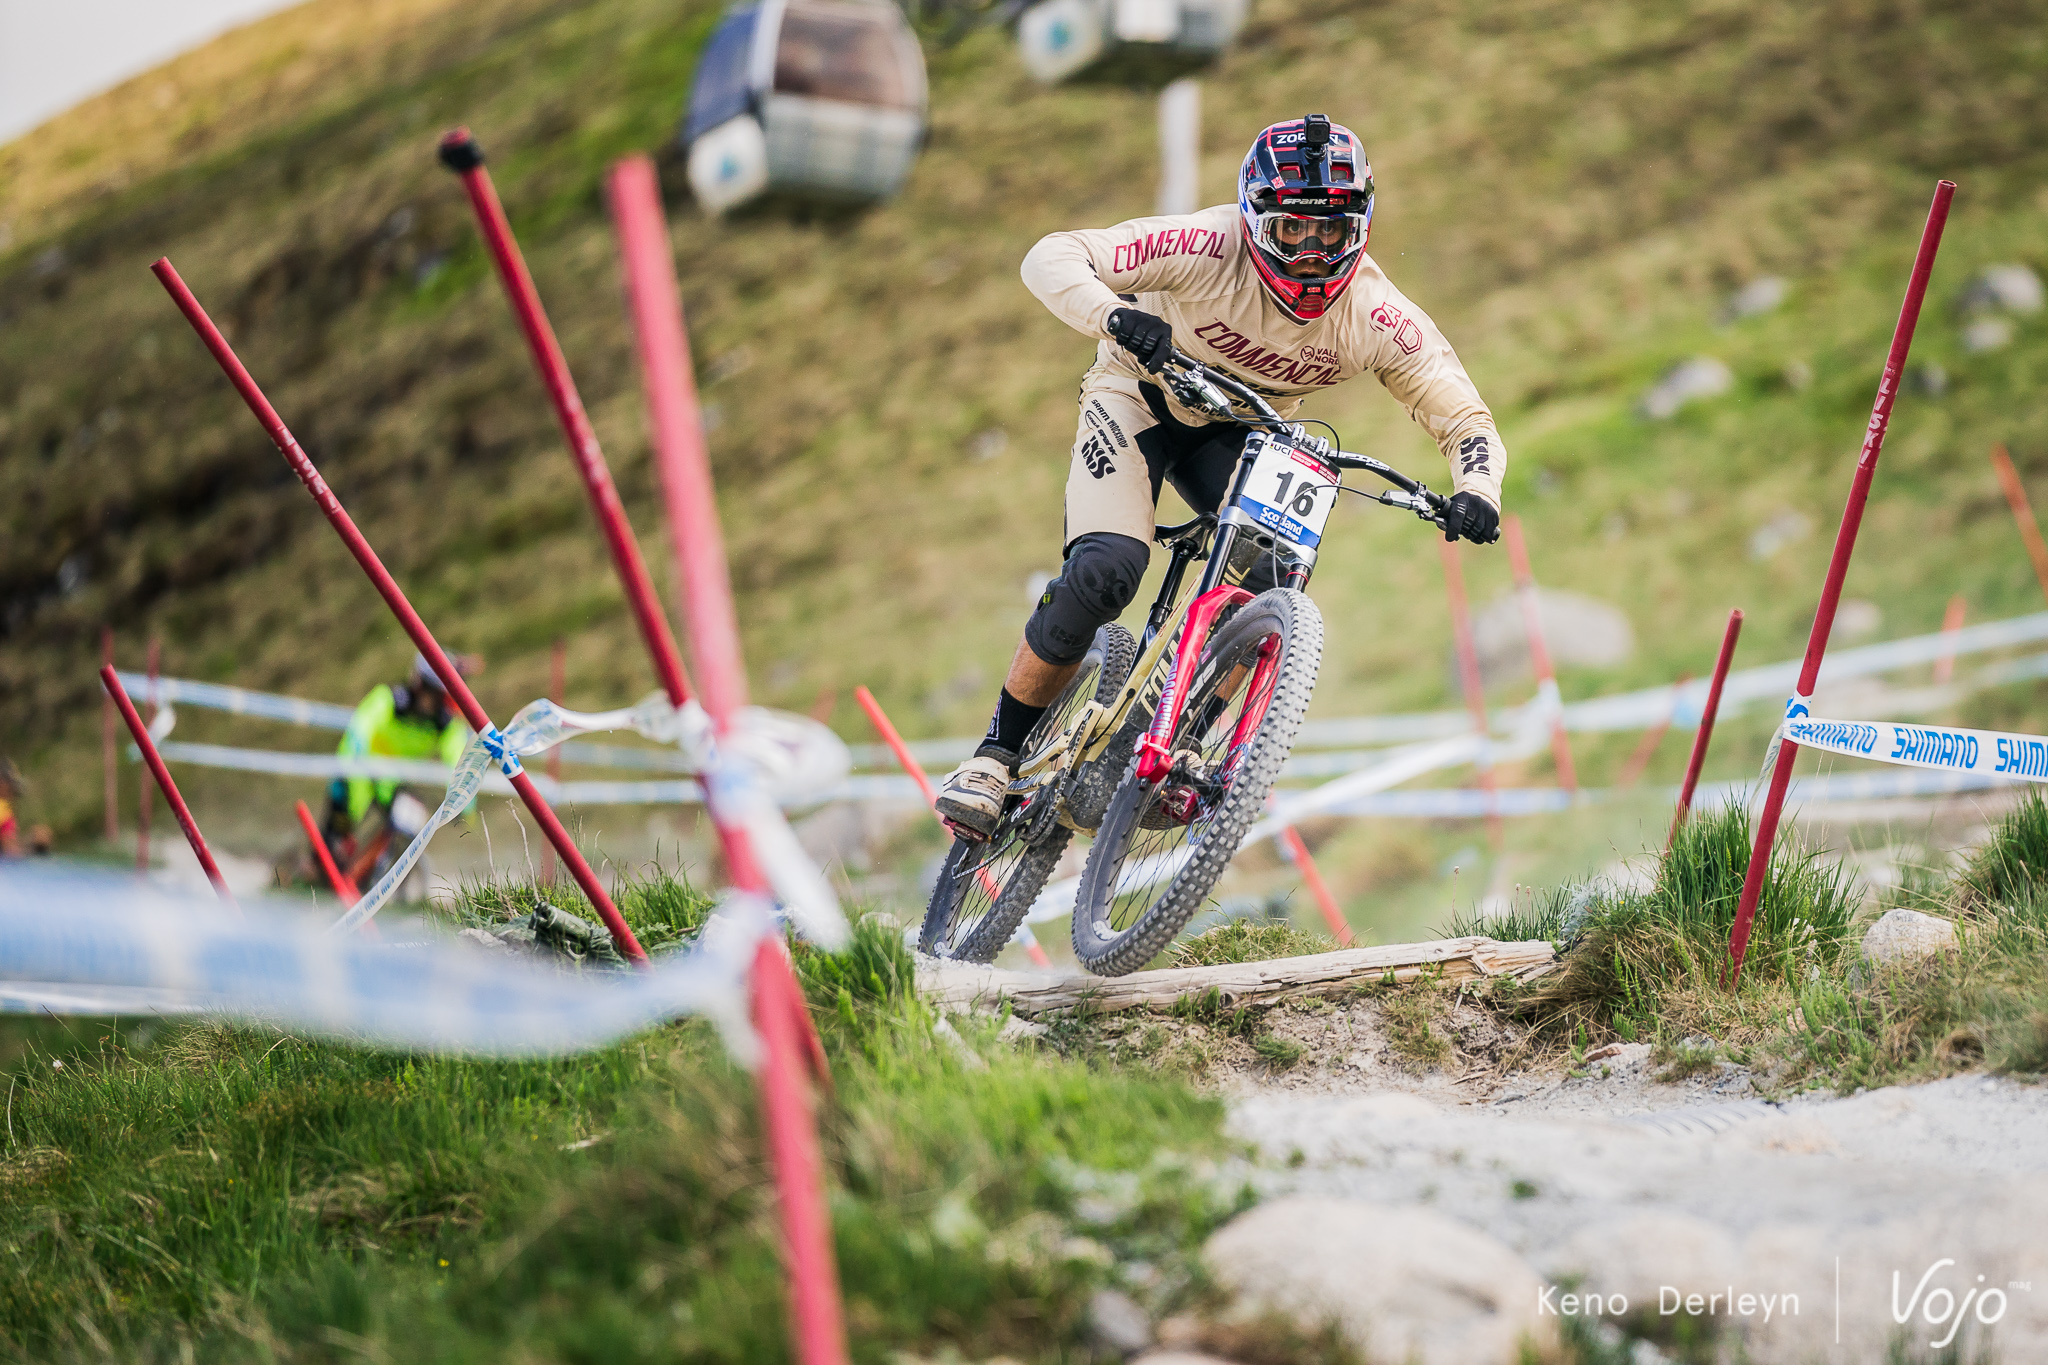 DH World Cup #2 | Fort William : Seagrave & Pierron domptent le Fort